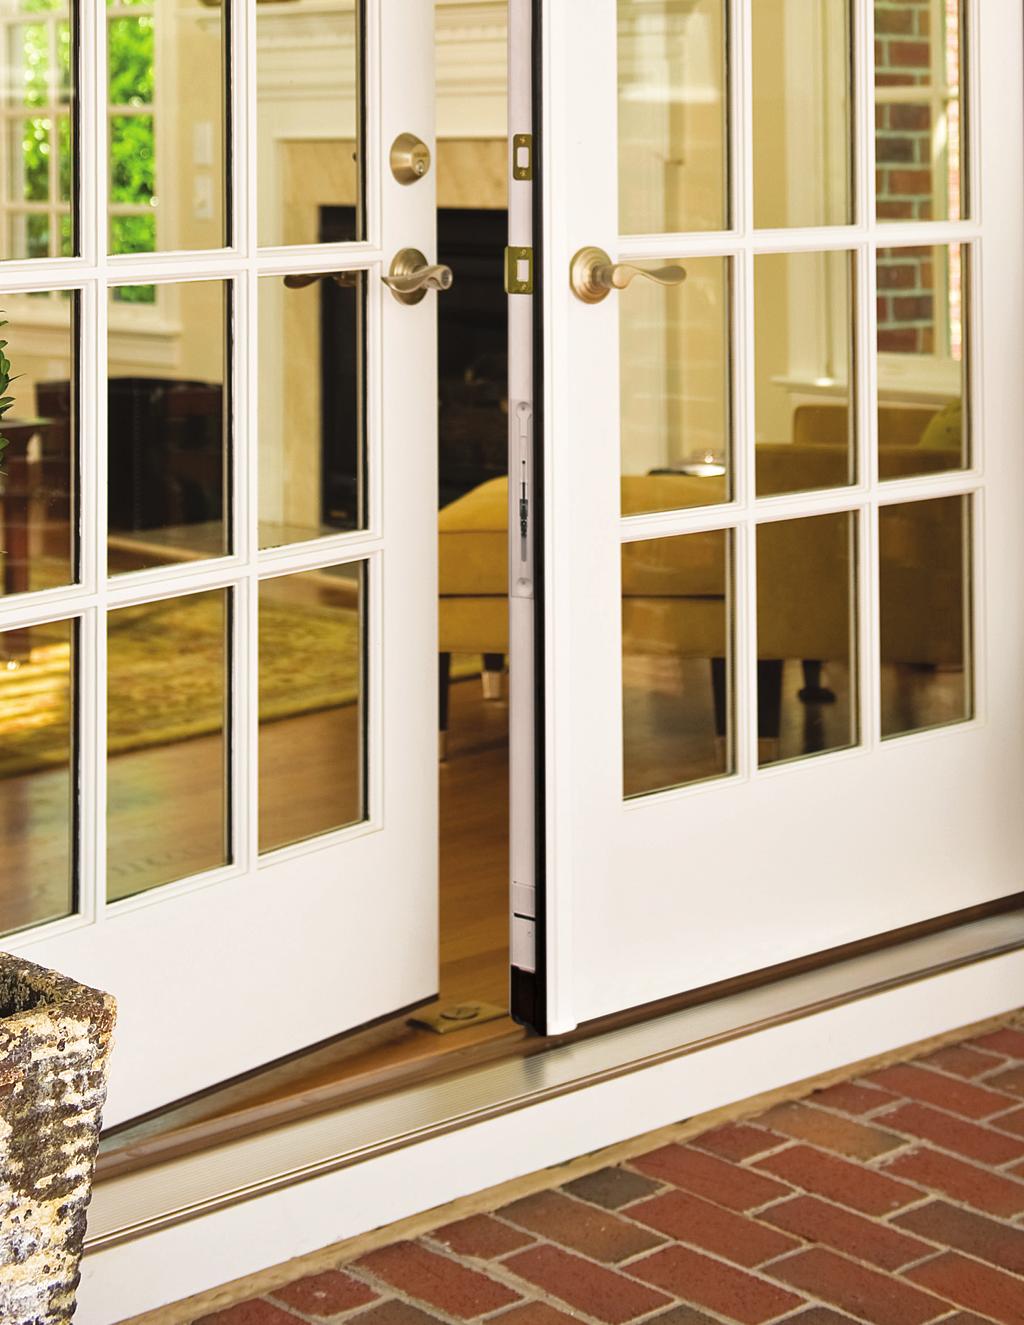 ASTRAGALS POWERED BY ENDURA FRENCH DOOR SOLUTIONS T H E U L T I M A T E A S T R A G A L P R O D U C T The